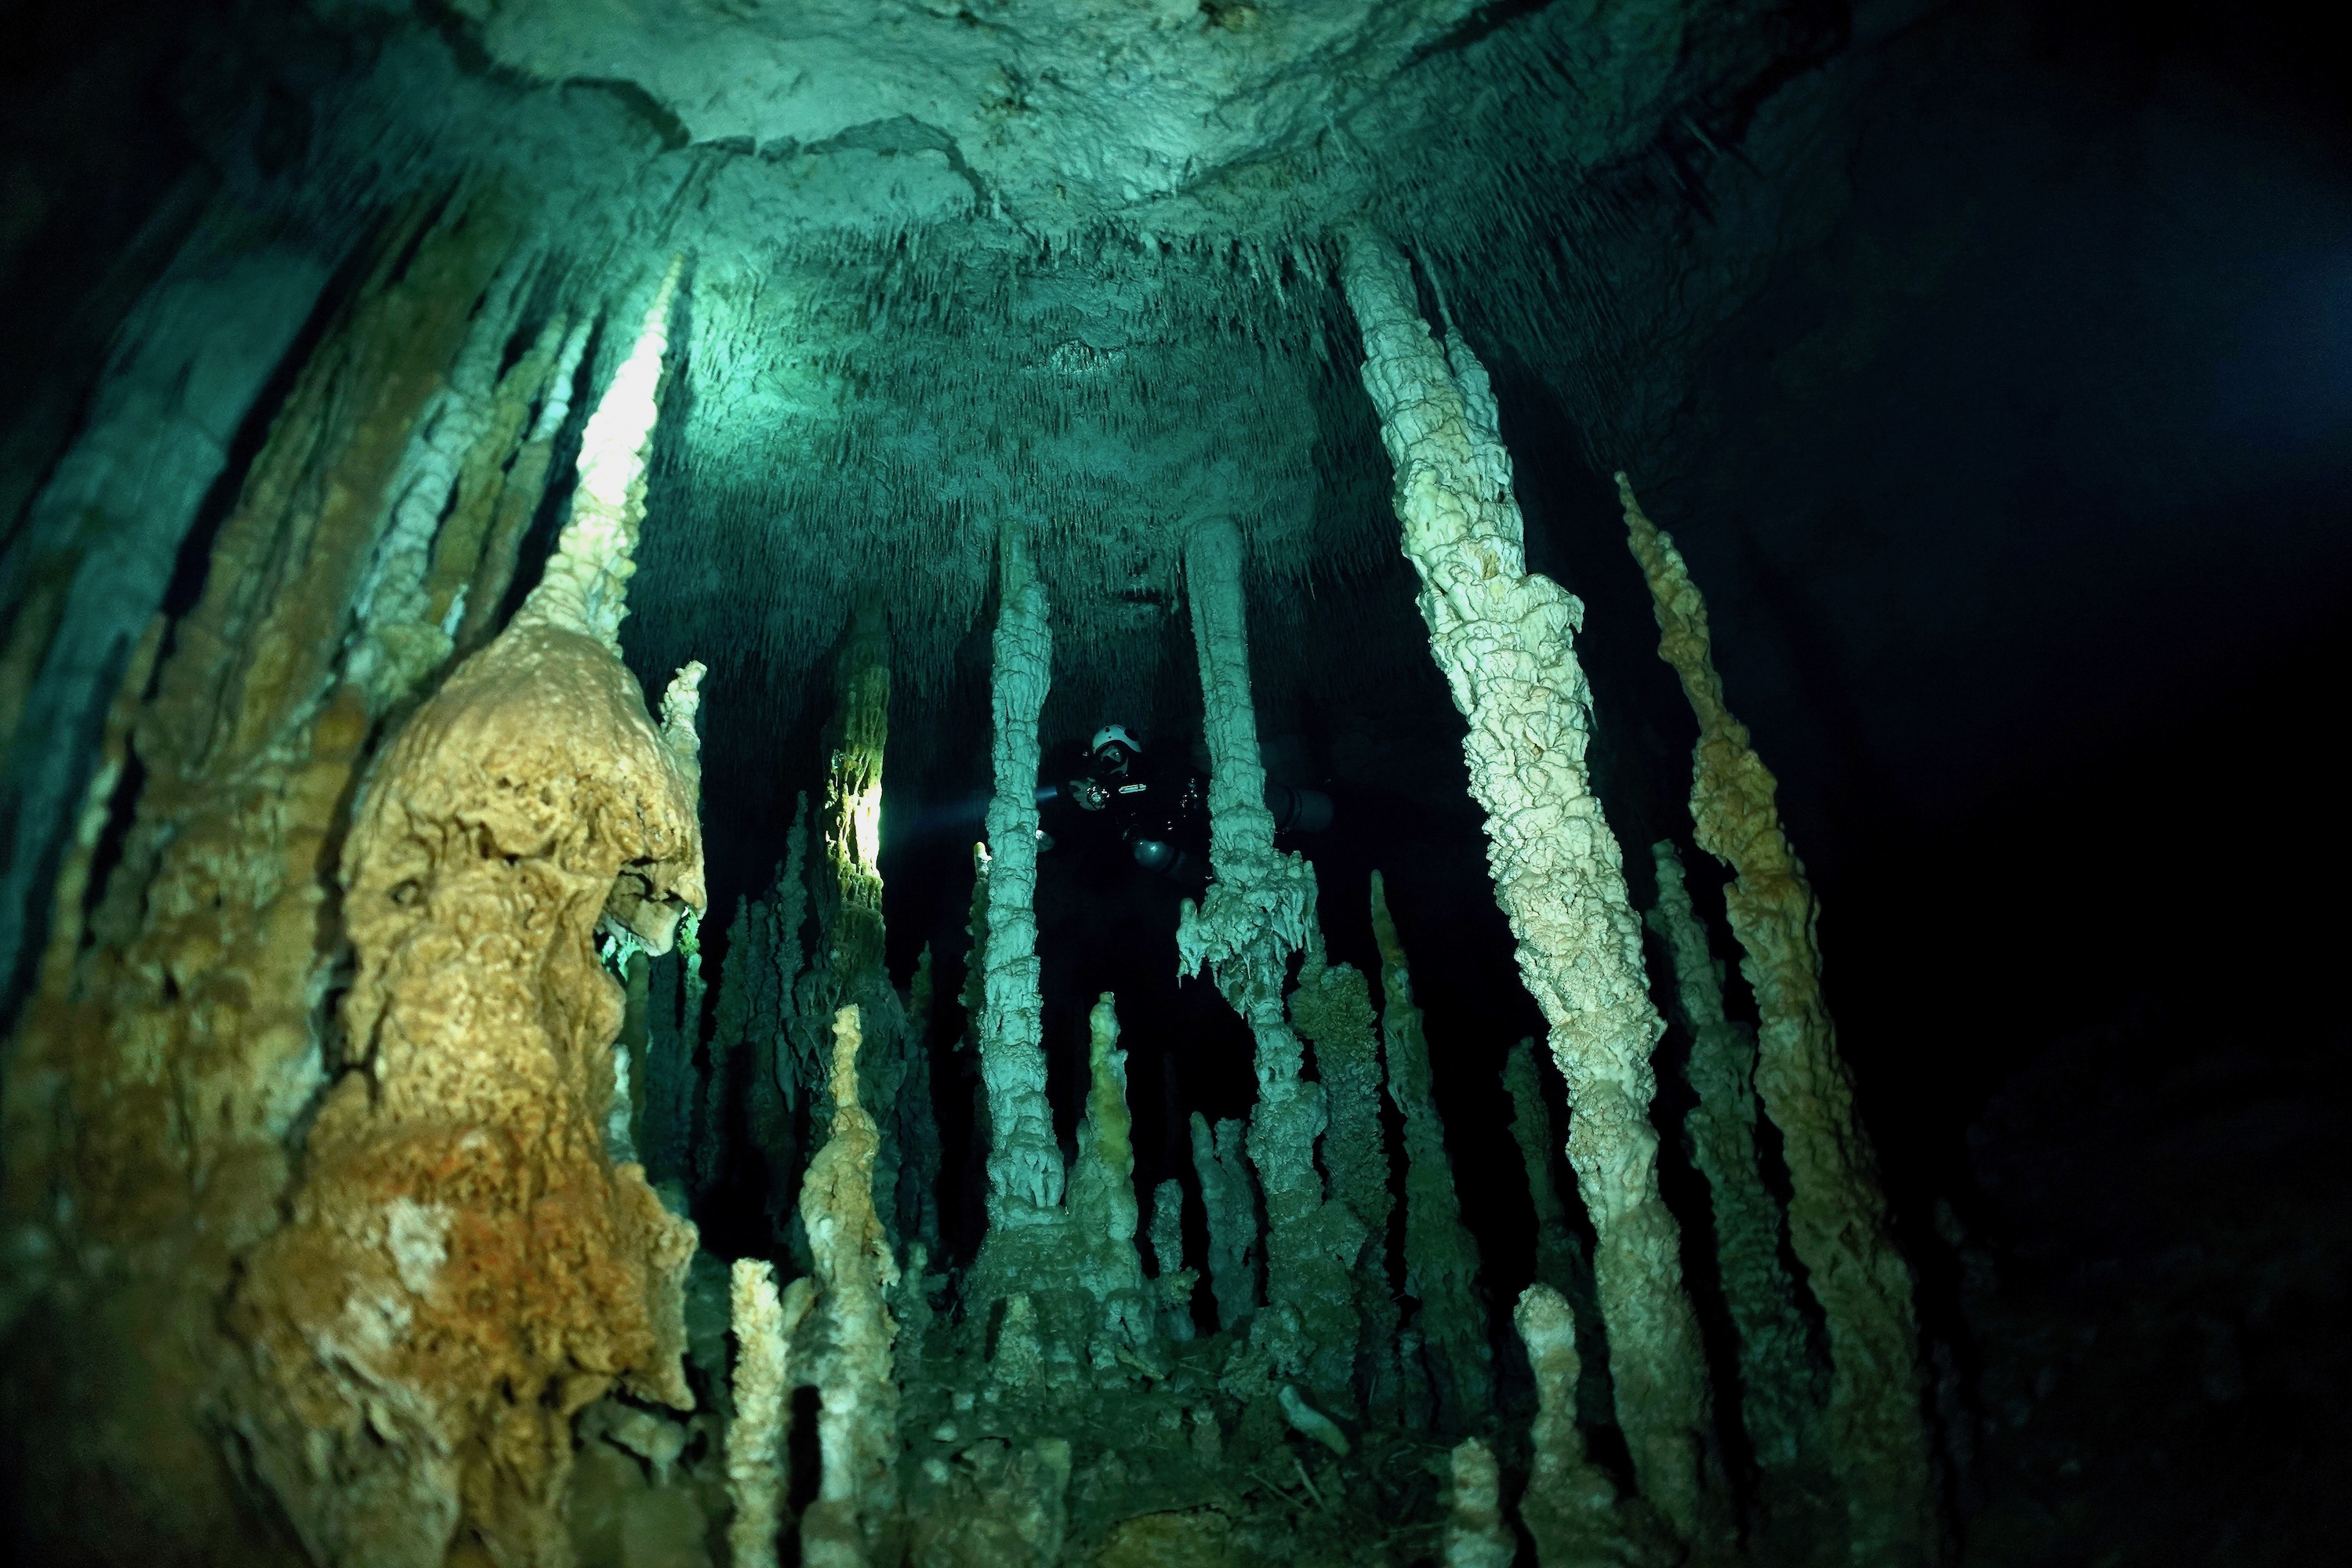 Diver among pillars in Cenote Zacil-Ha. Photo by Pierre Constant